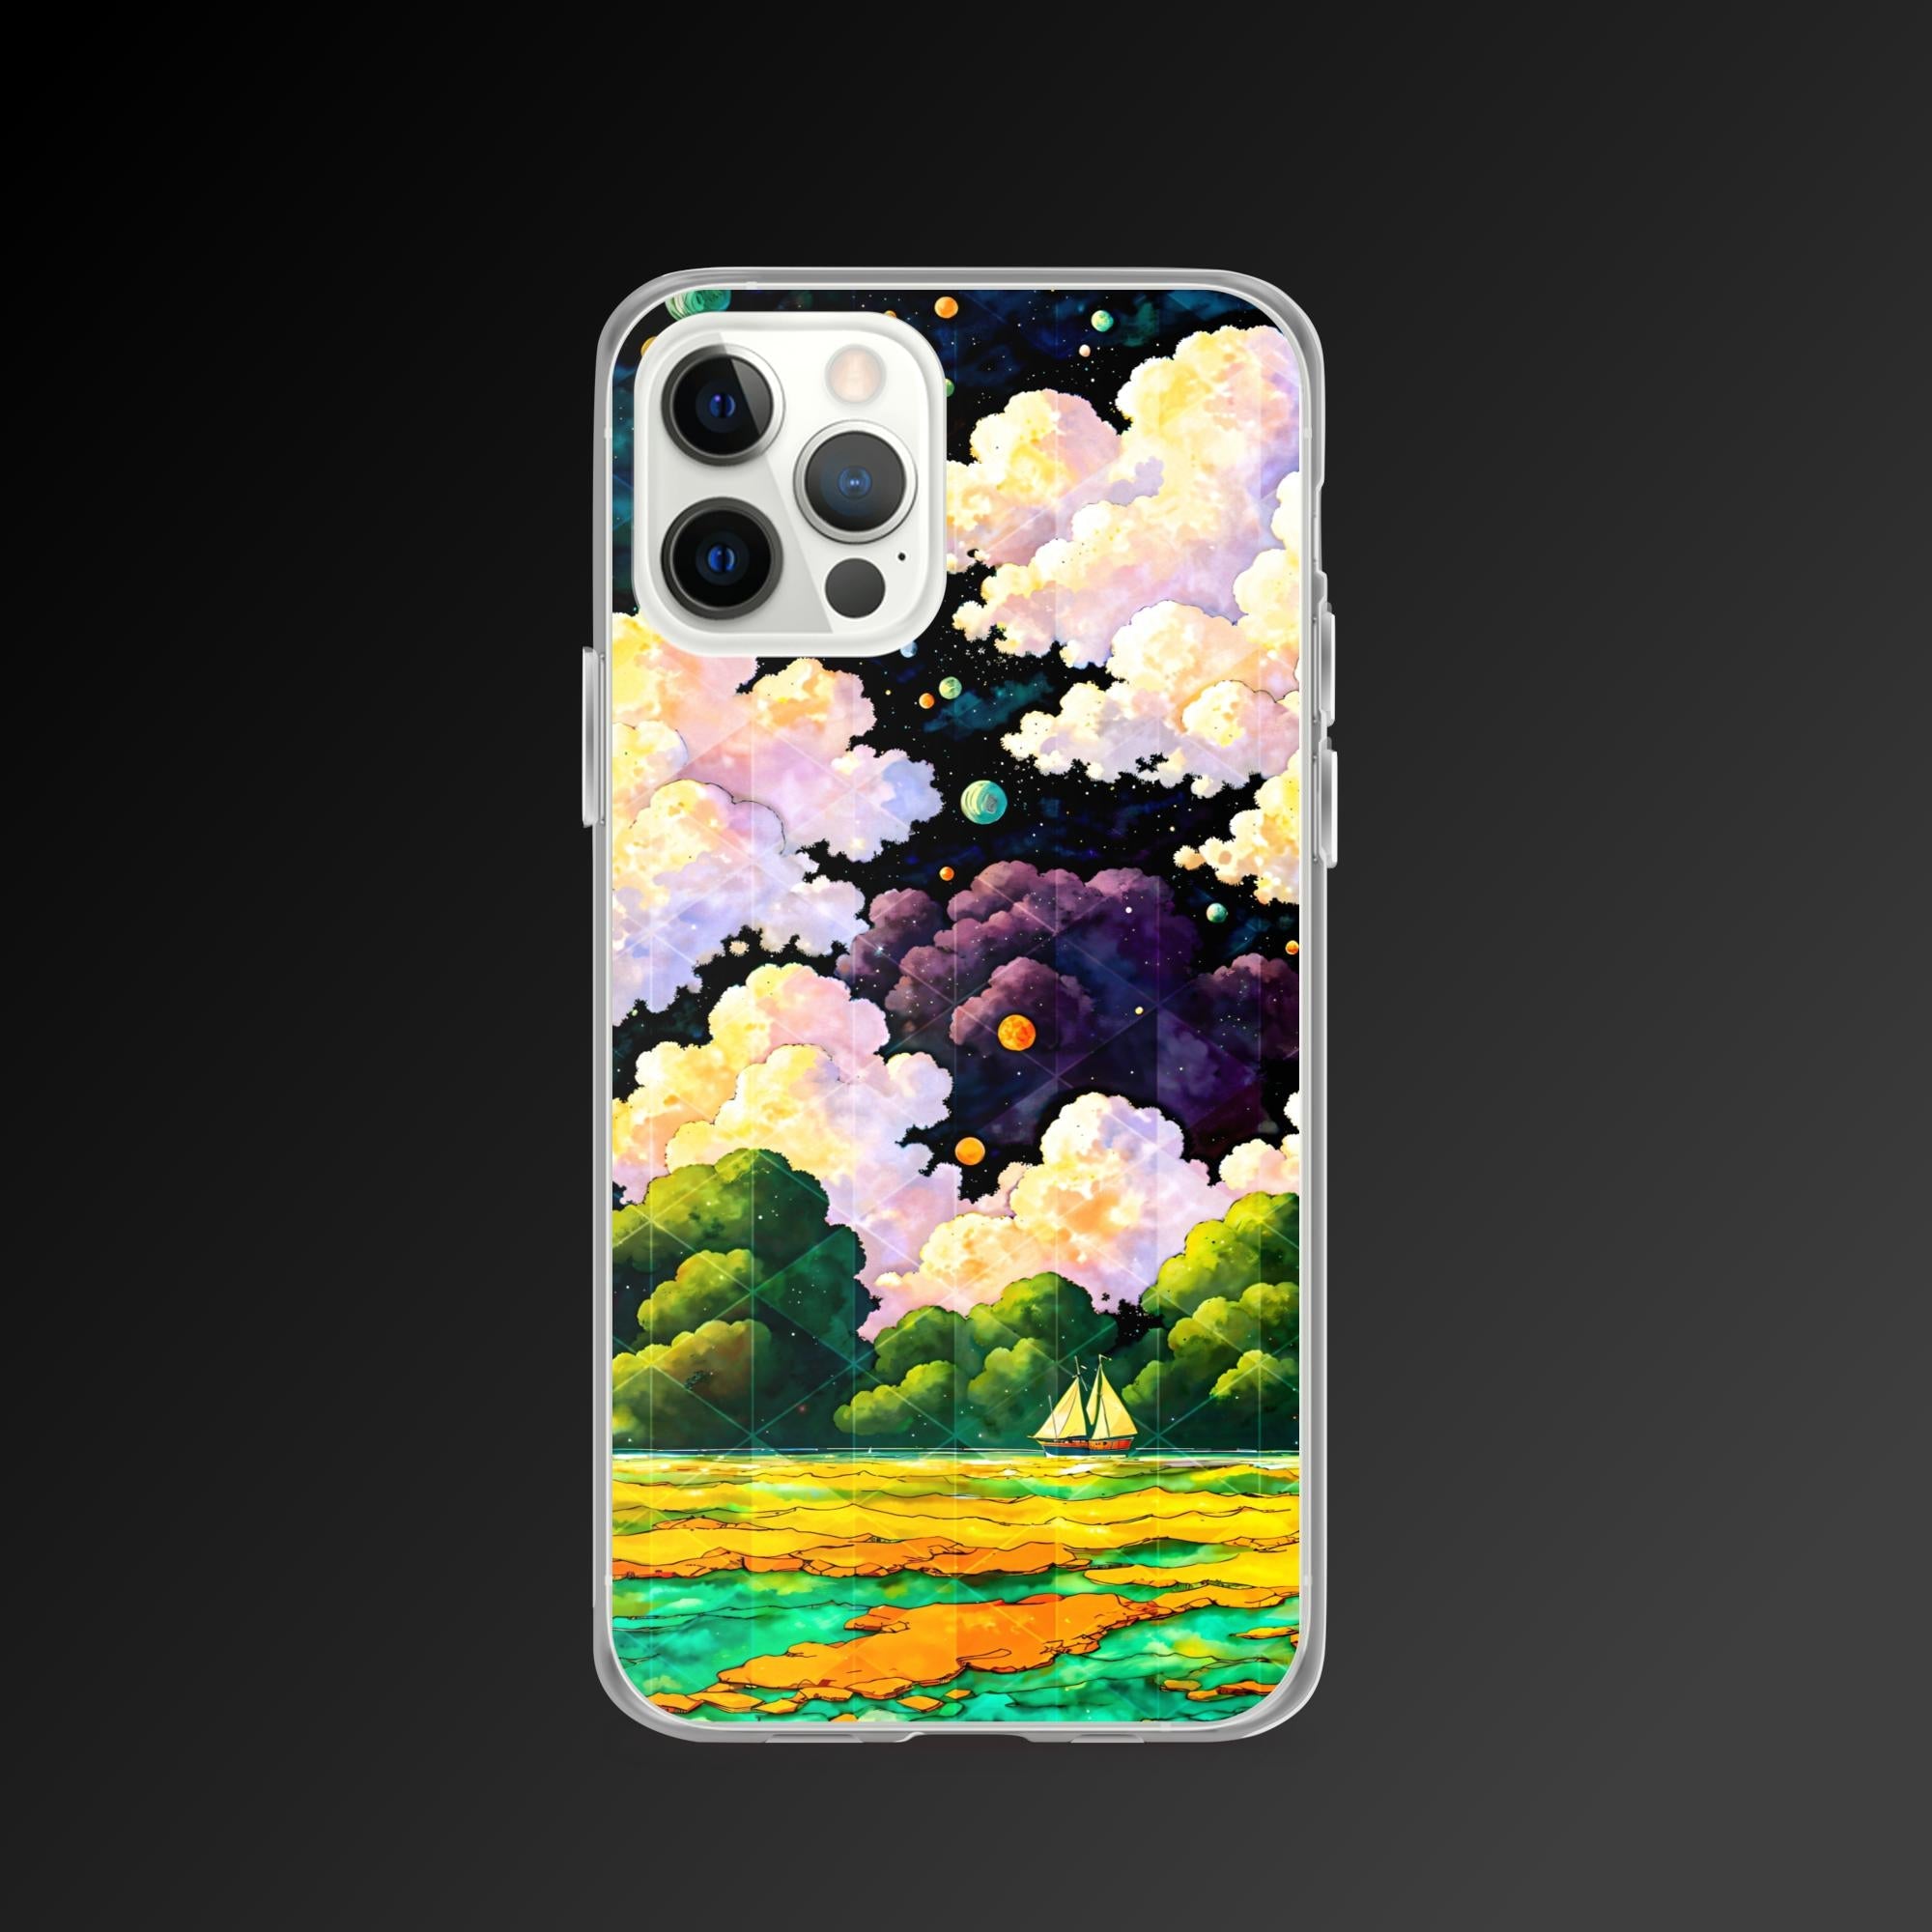 "Horizon quest" clear iphone case - Clear iphone case - Ever colorful